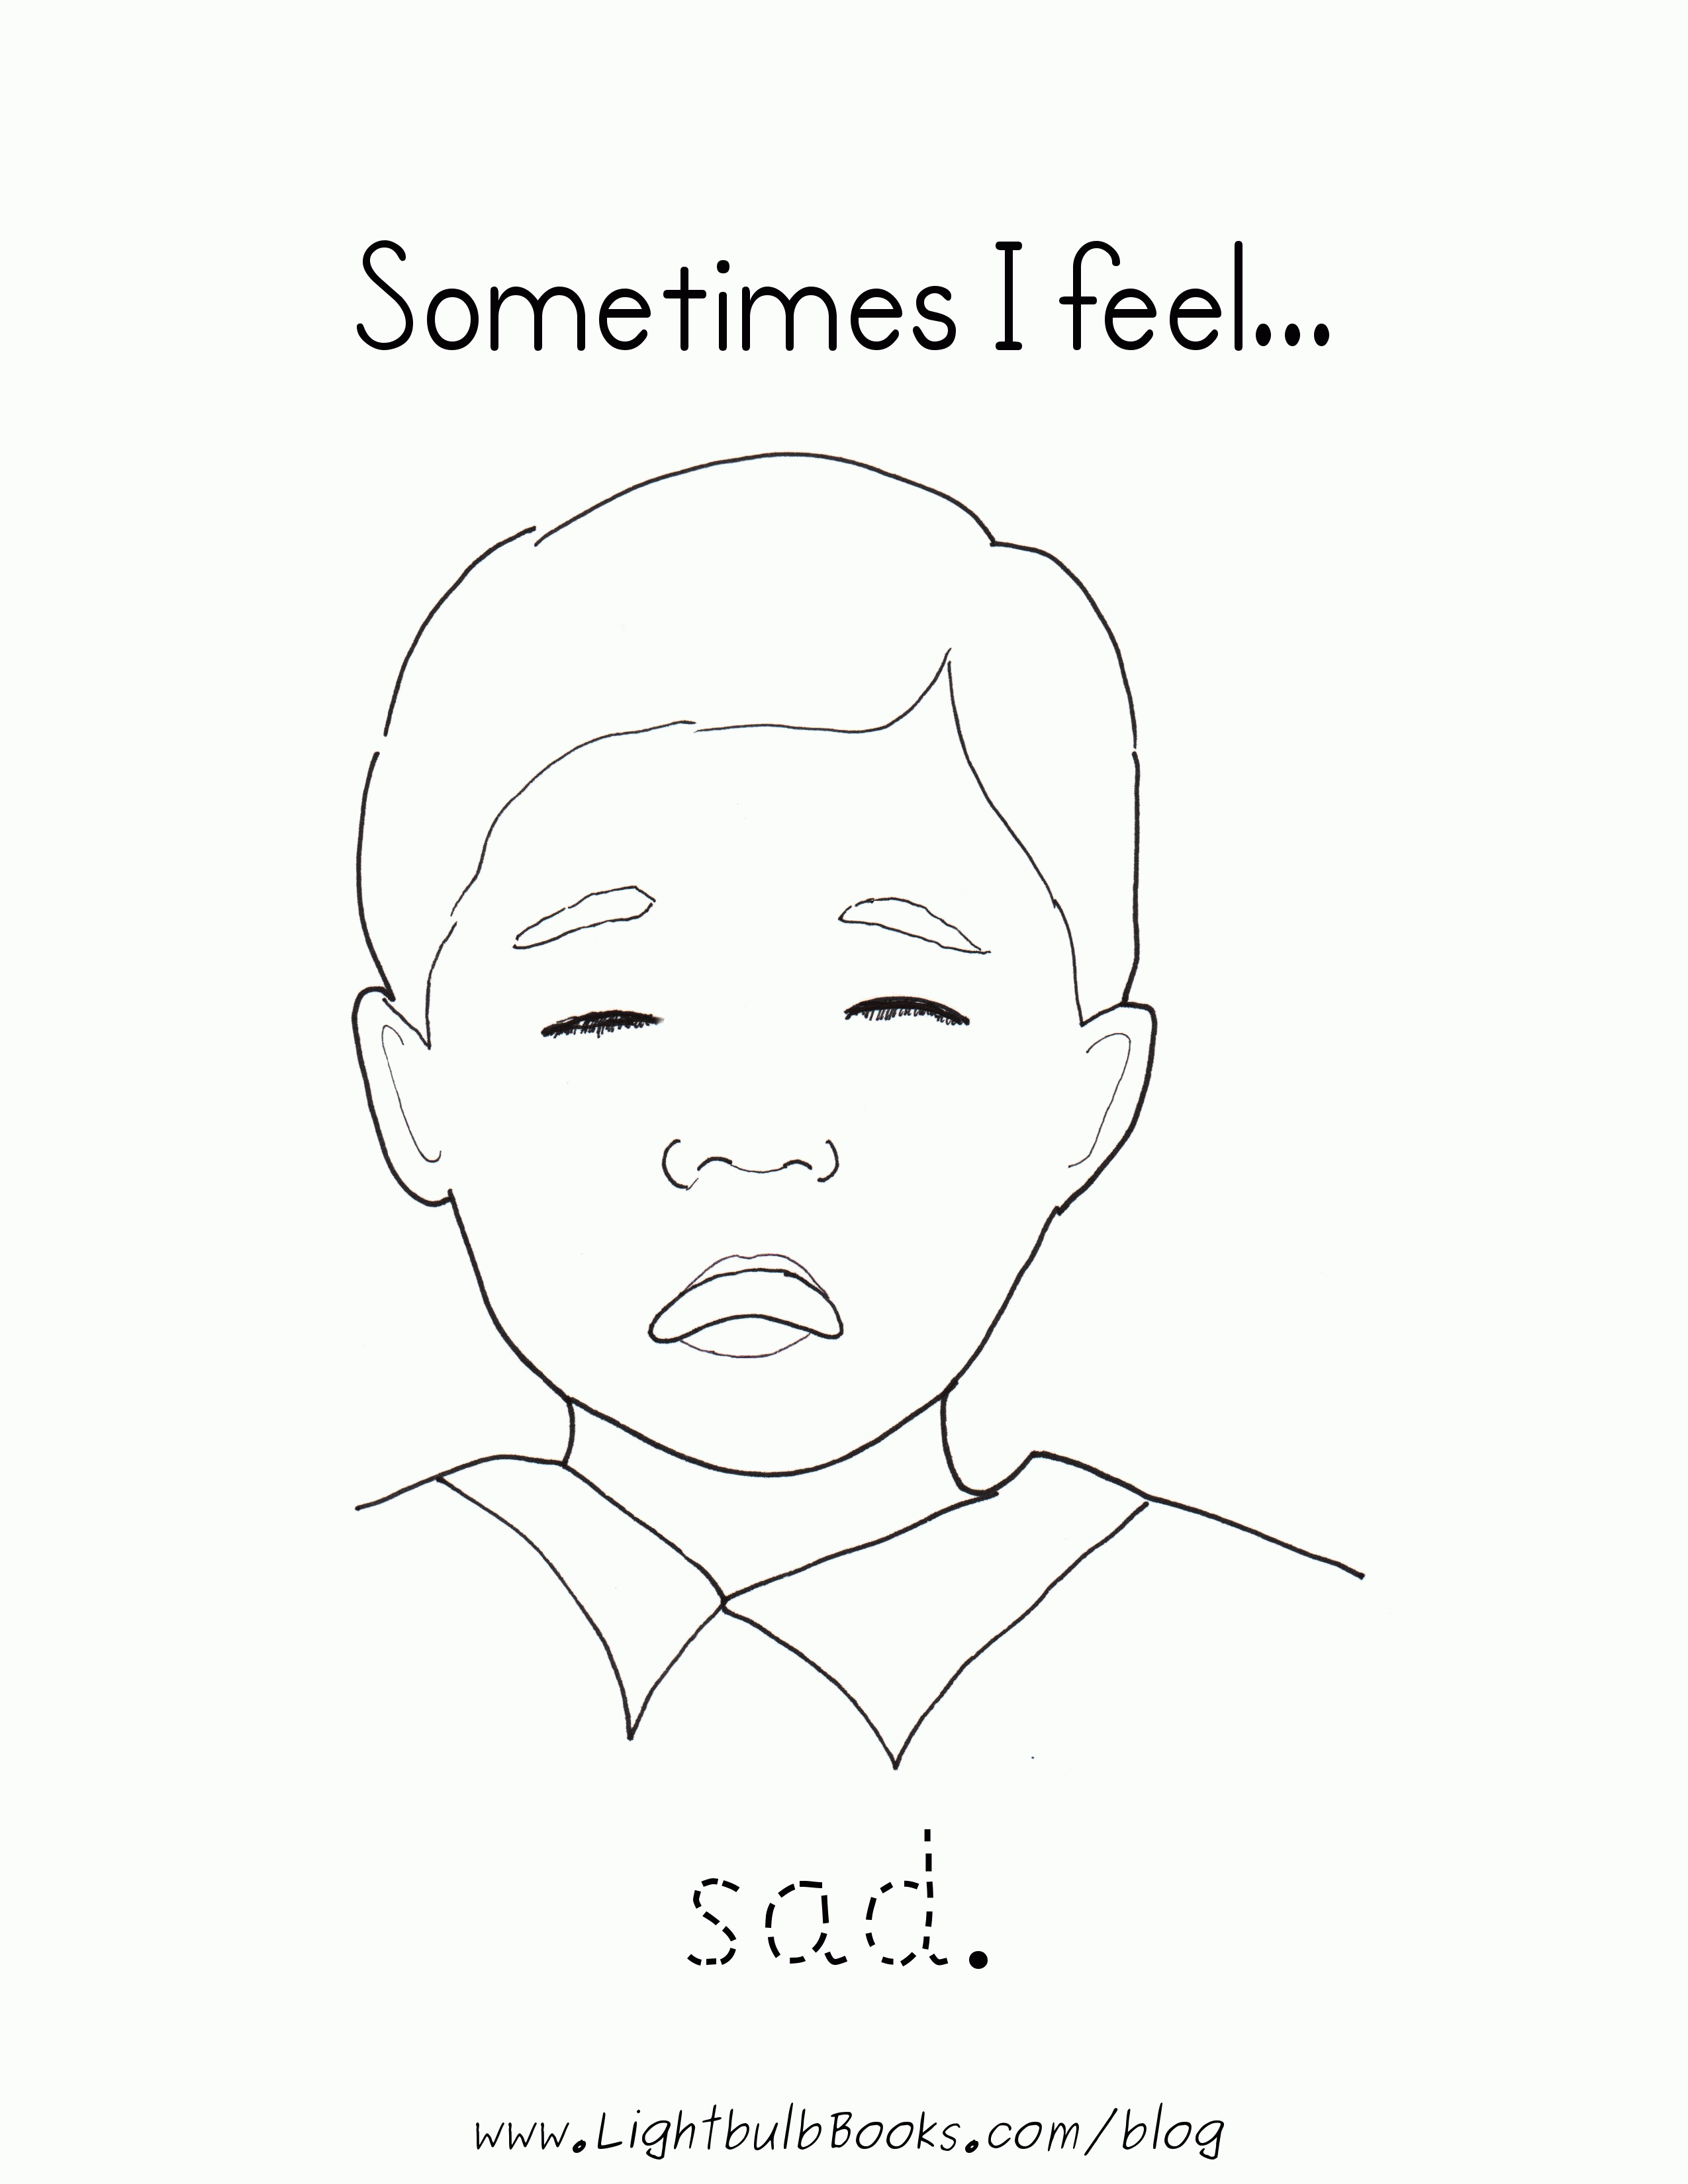 Free Coloring Page Of A Sad Face, Download Free Coloring Page Of A Sad Face  png images, Free ClipArts on Clipart Library